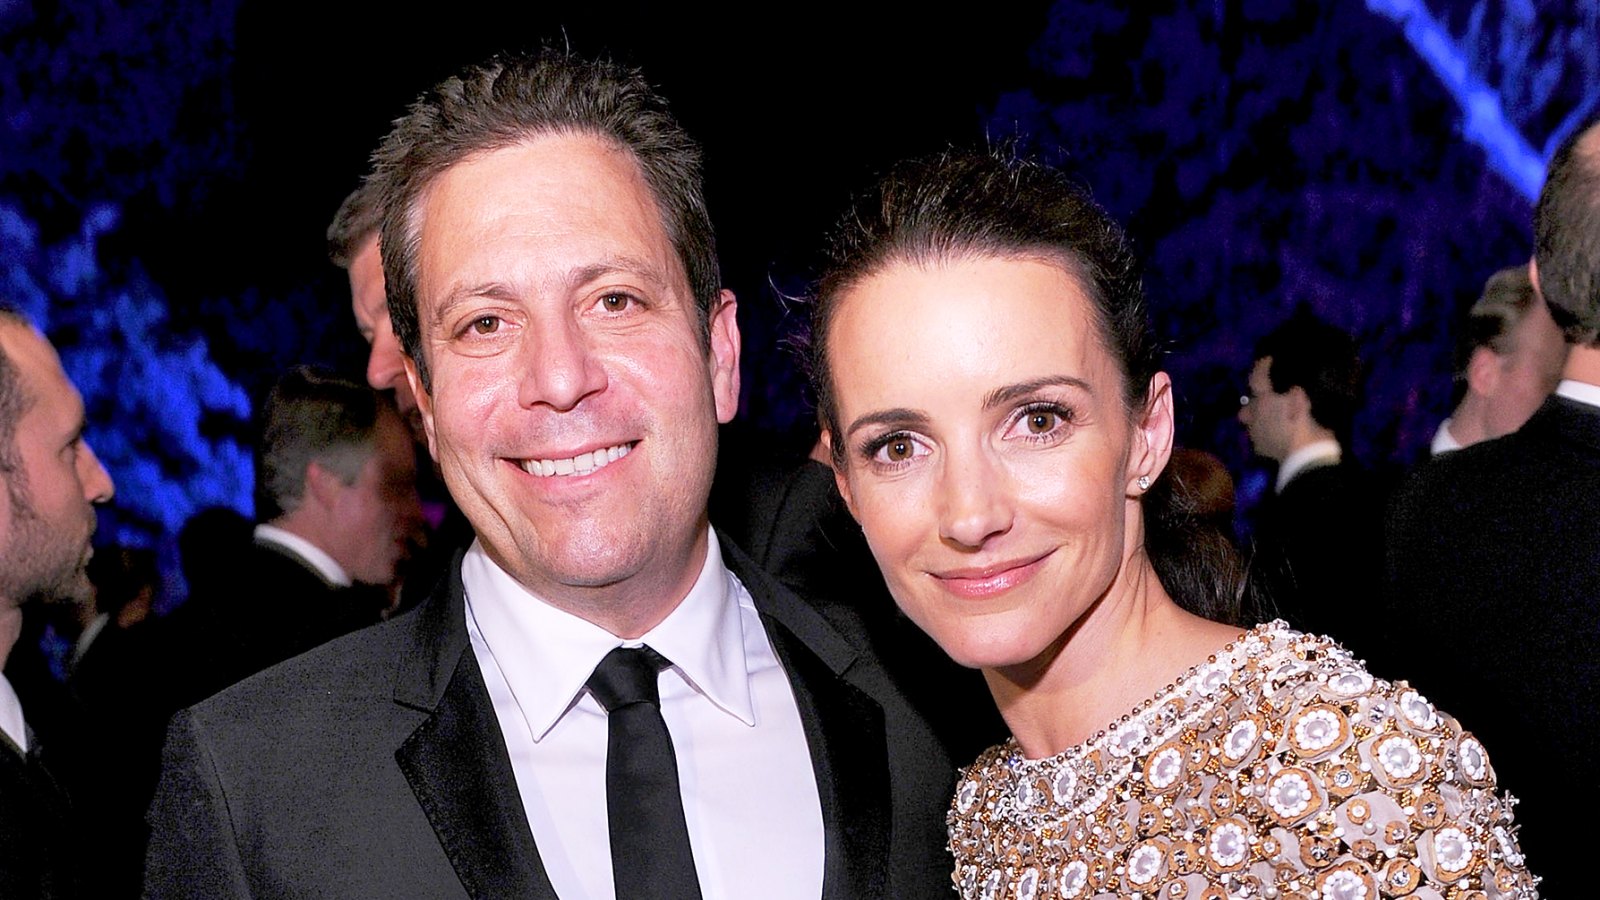 Darren Star and Kristin Davis attend the Vanity Fair party for the 2010 White House Correspondents' Association Dinner at the residence of the French Ambassador in Washington, DC.